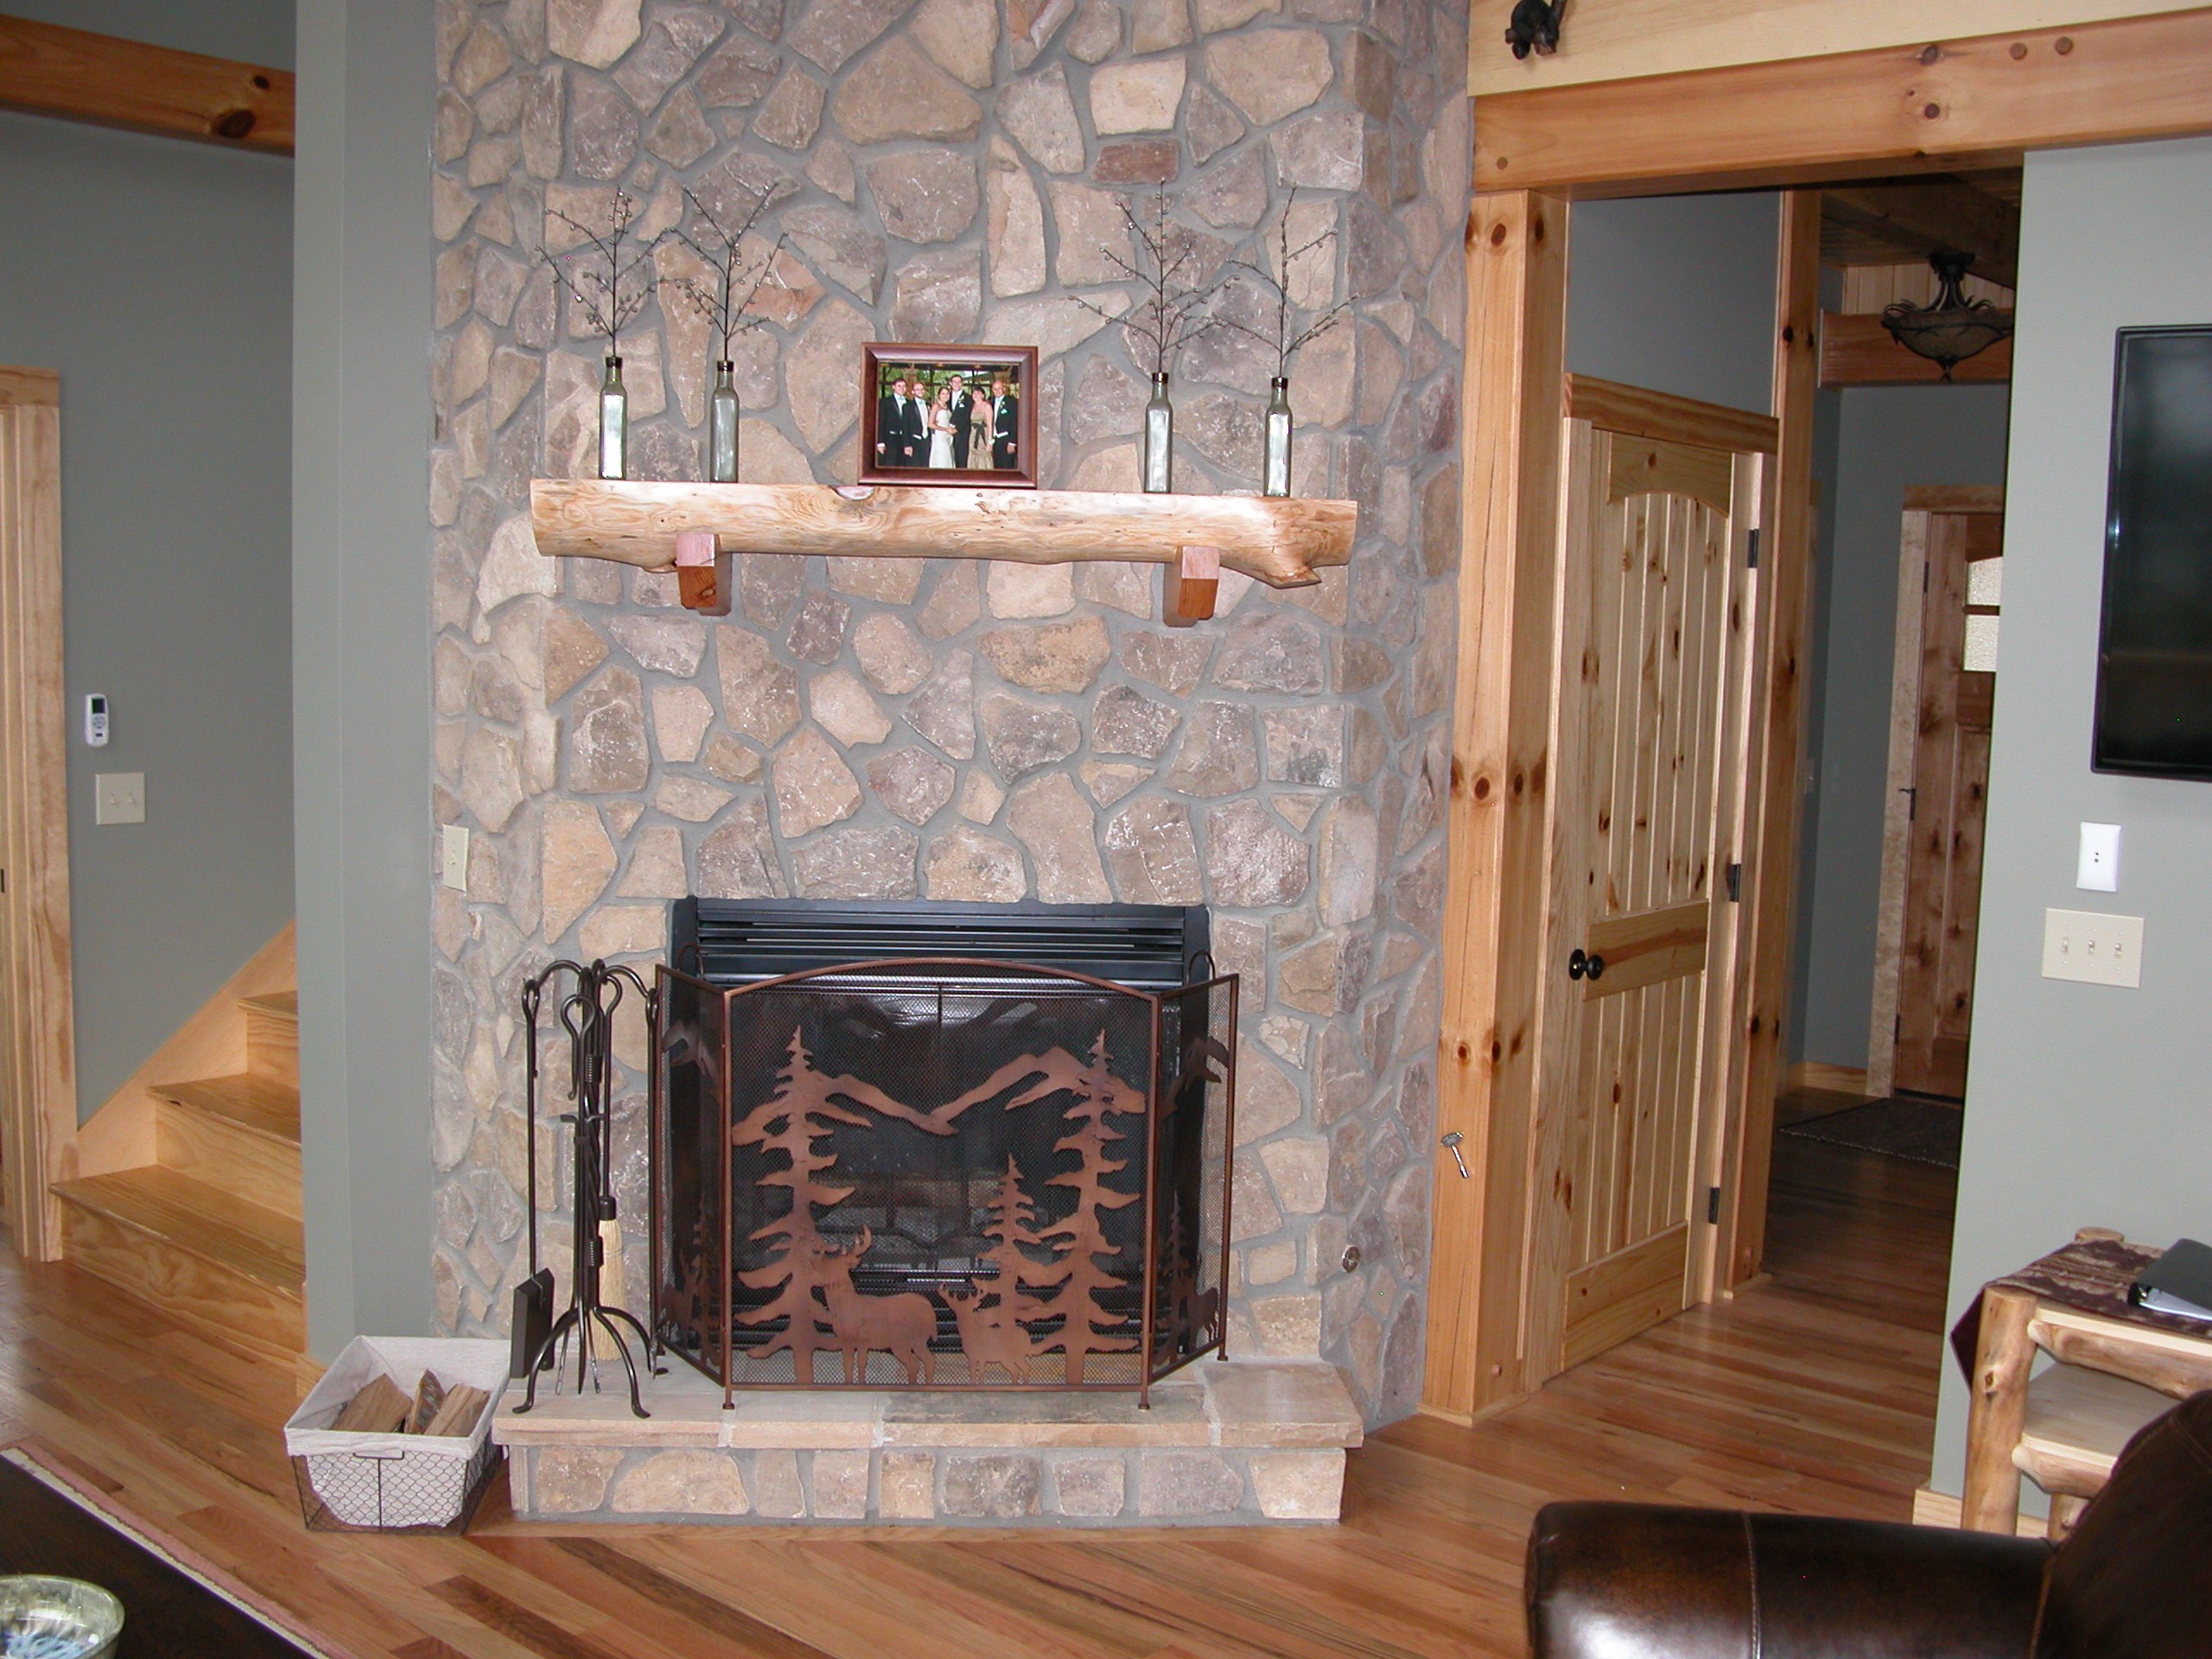 house remodeling lake james nc,house remodeling ideas blowing rock nc,remodel a house boone nc,remodeling house ideas blowing rock